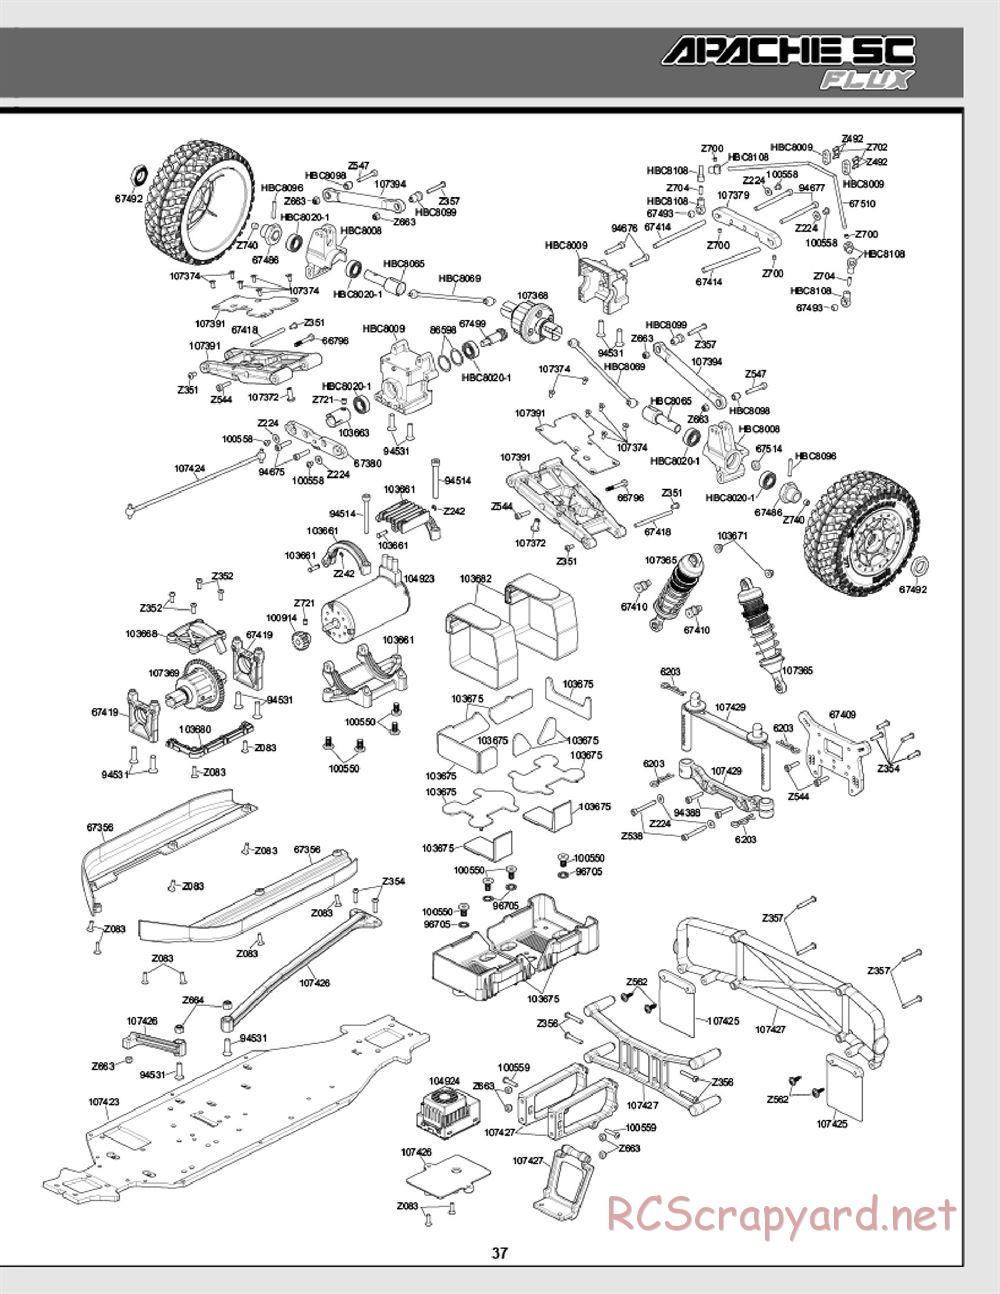 HPI - Apache SC Flux - Exploded View - Page 37